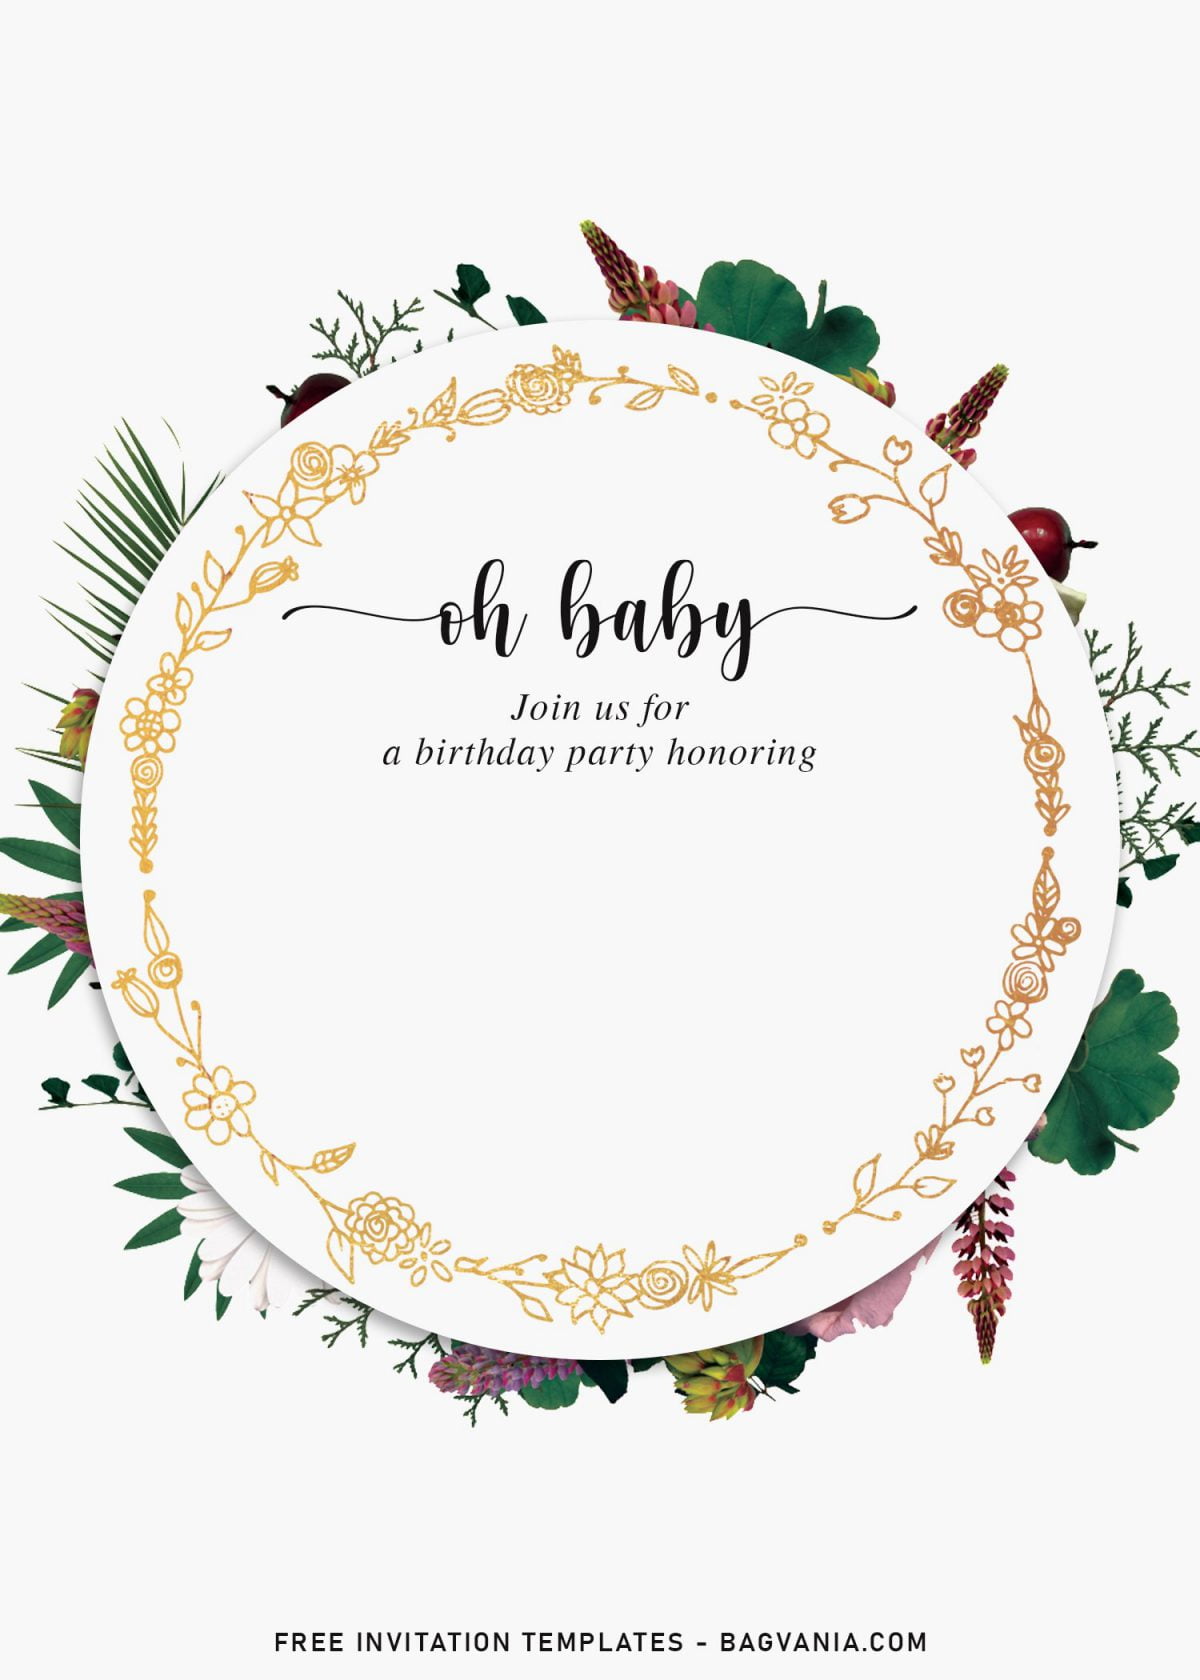 9+ Botanical Floral Birthday Invitation Templates and has 